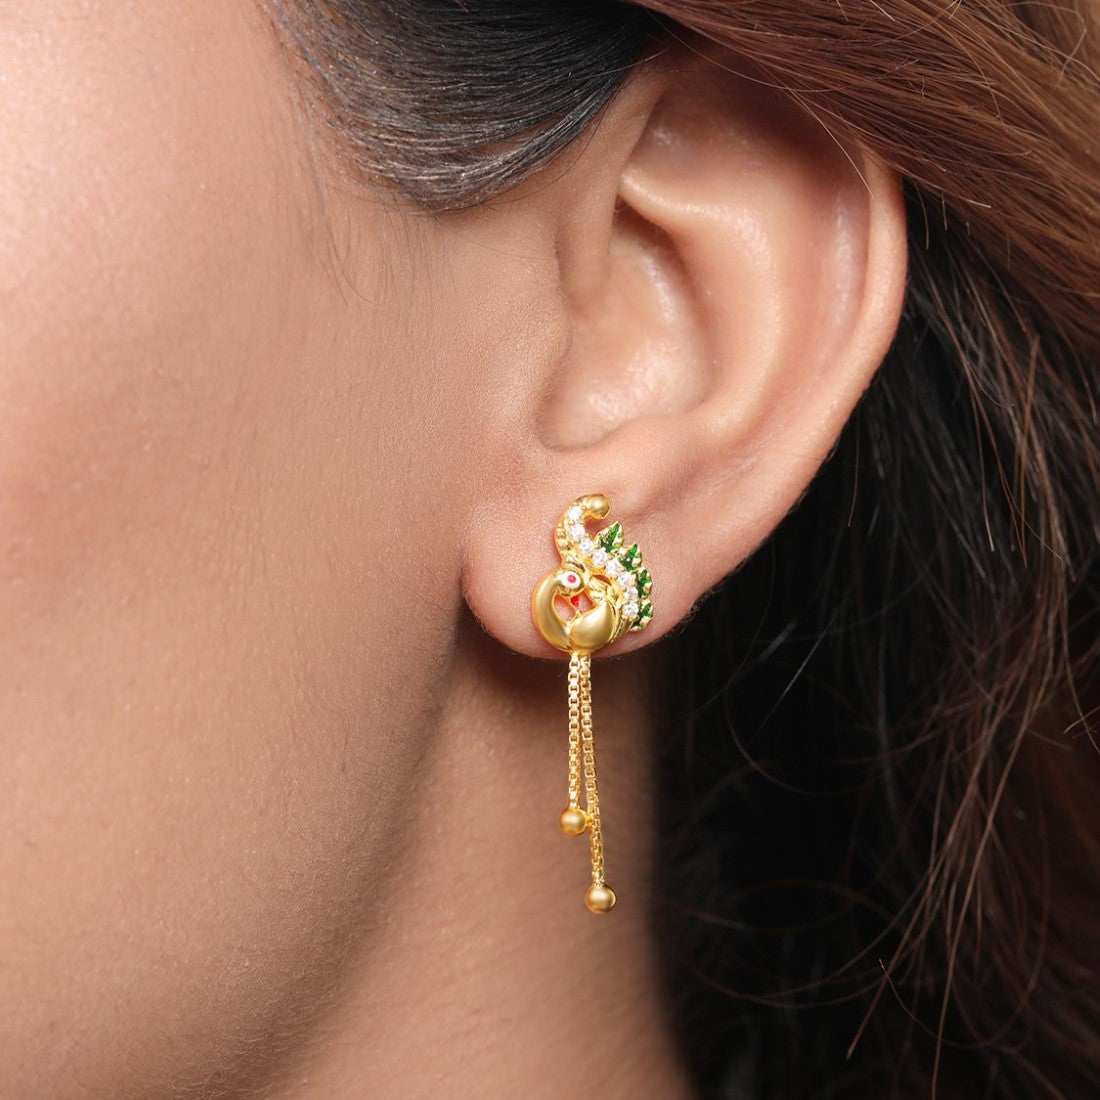 Regal Plumage 925 Sterling Silver Gold-Plated Peacock Earrings